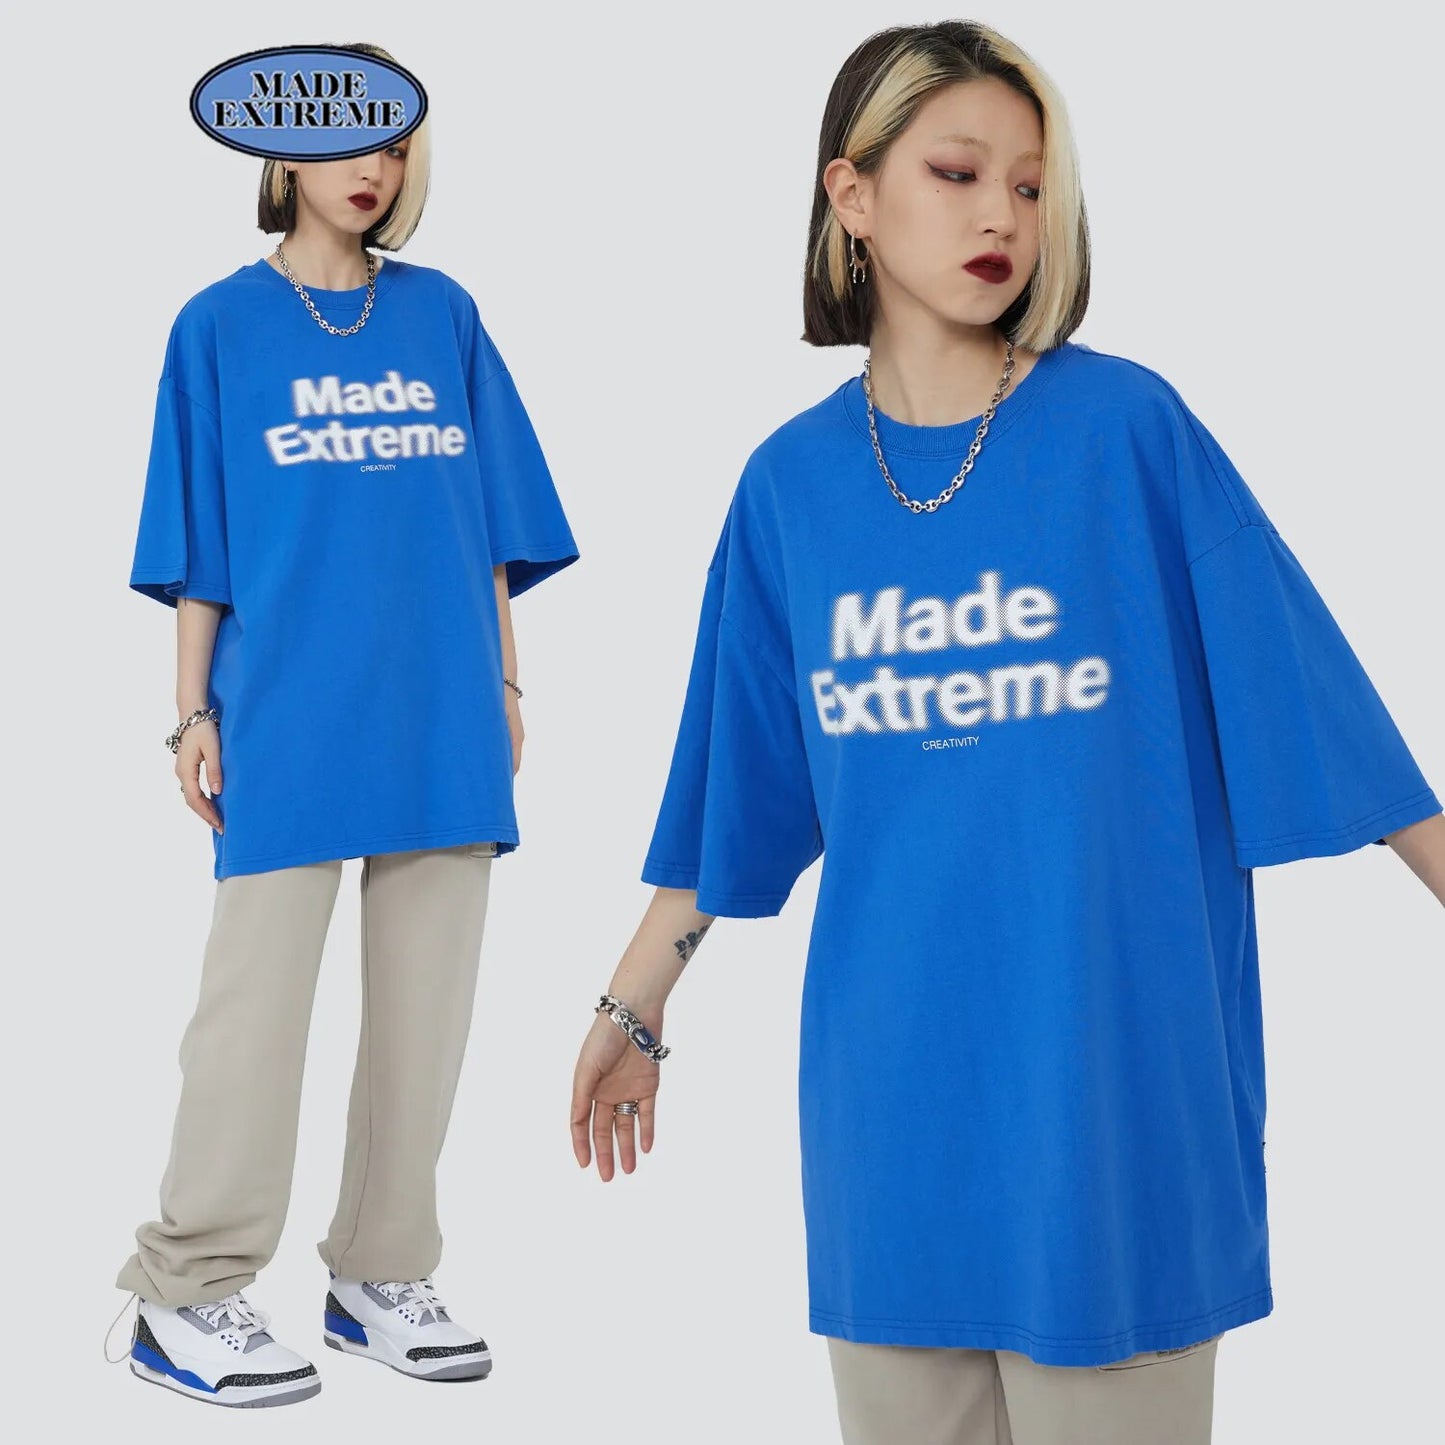 Made Extreme oversized graphic T-shirt